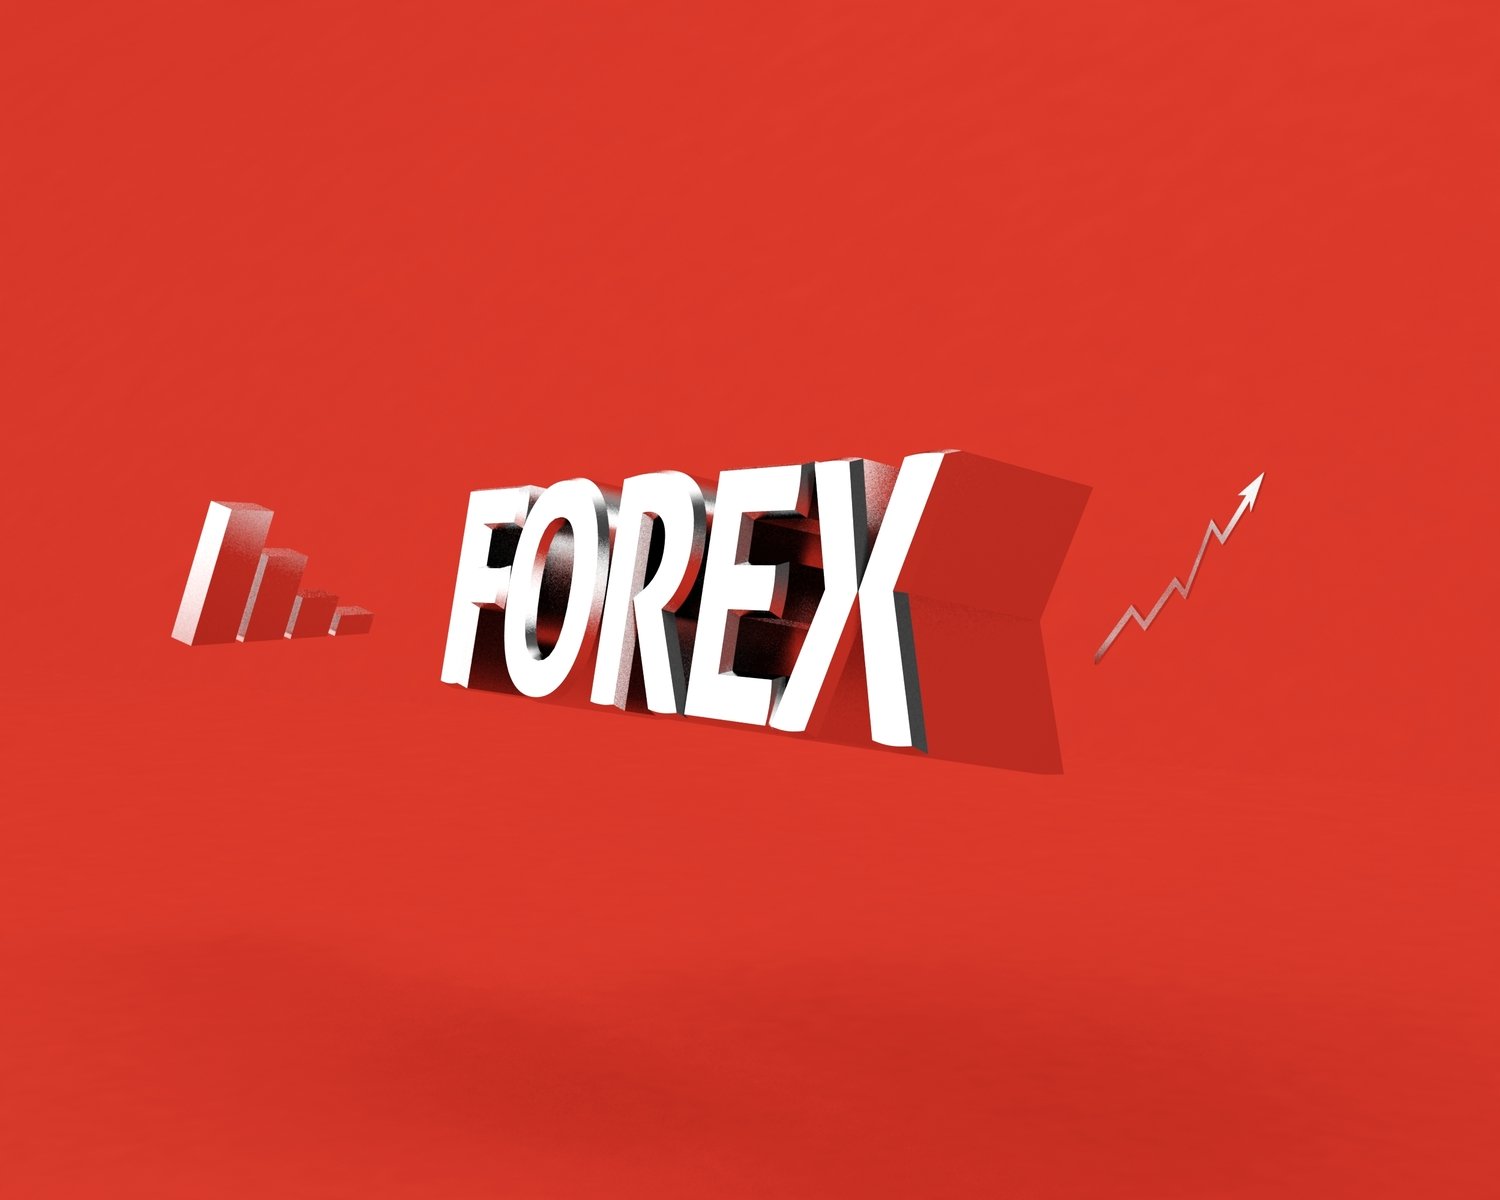 an abstract image of forex on a red background